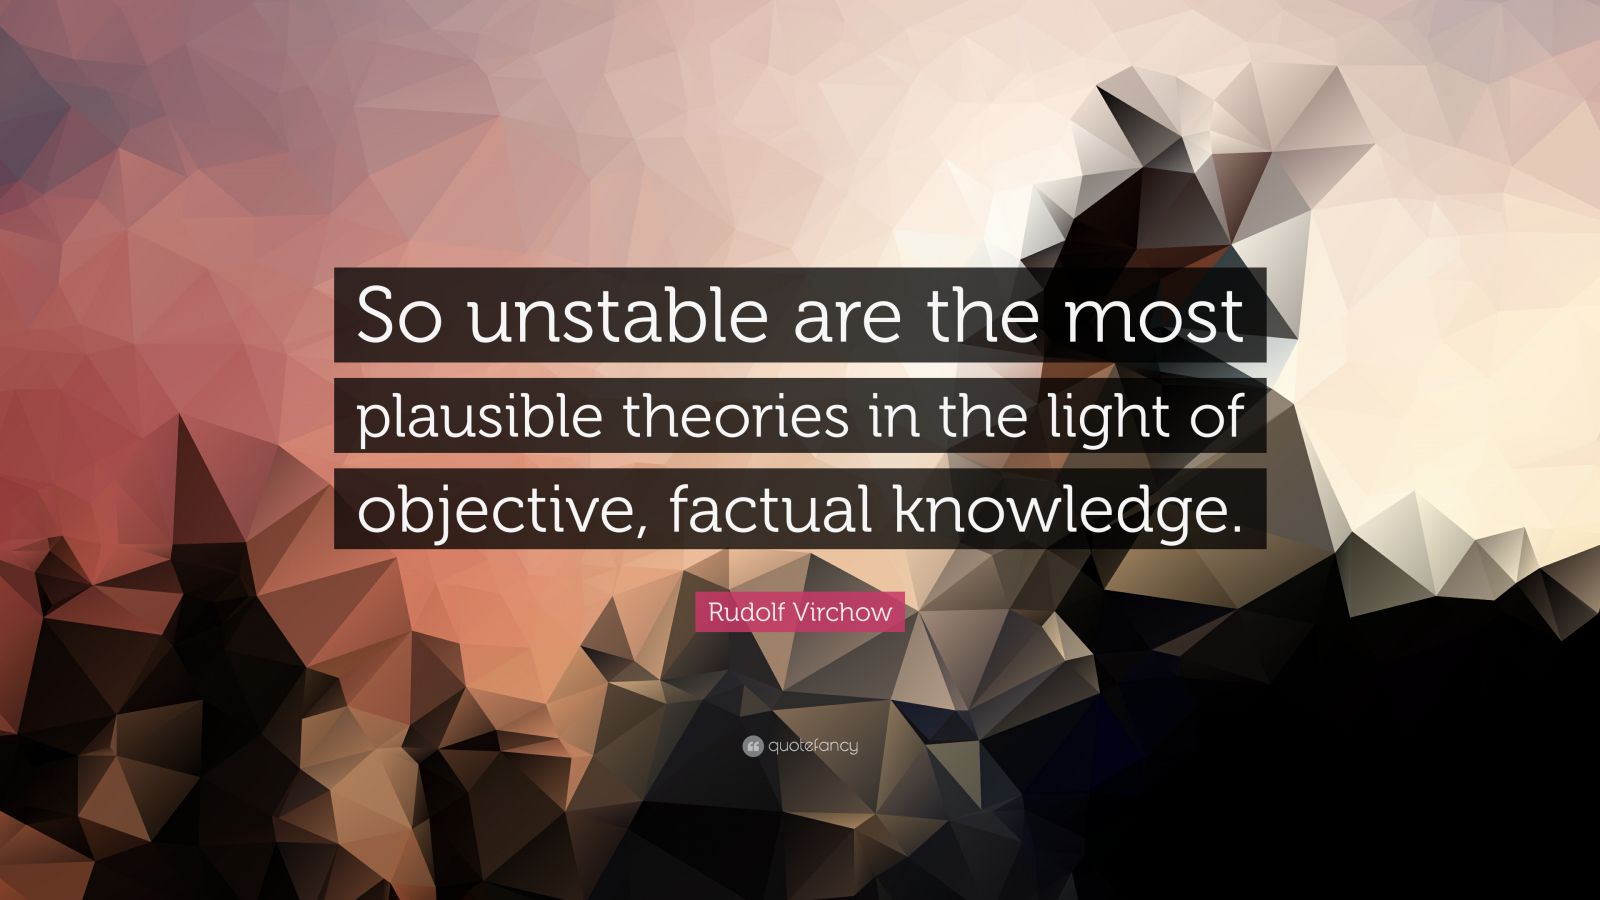 Rudolf Virchow Quote: “So unstable are the most plausible theories in ...